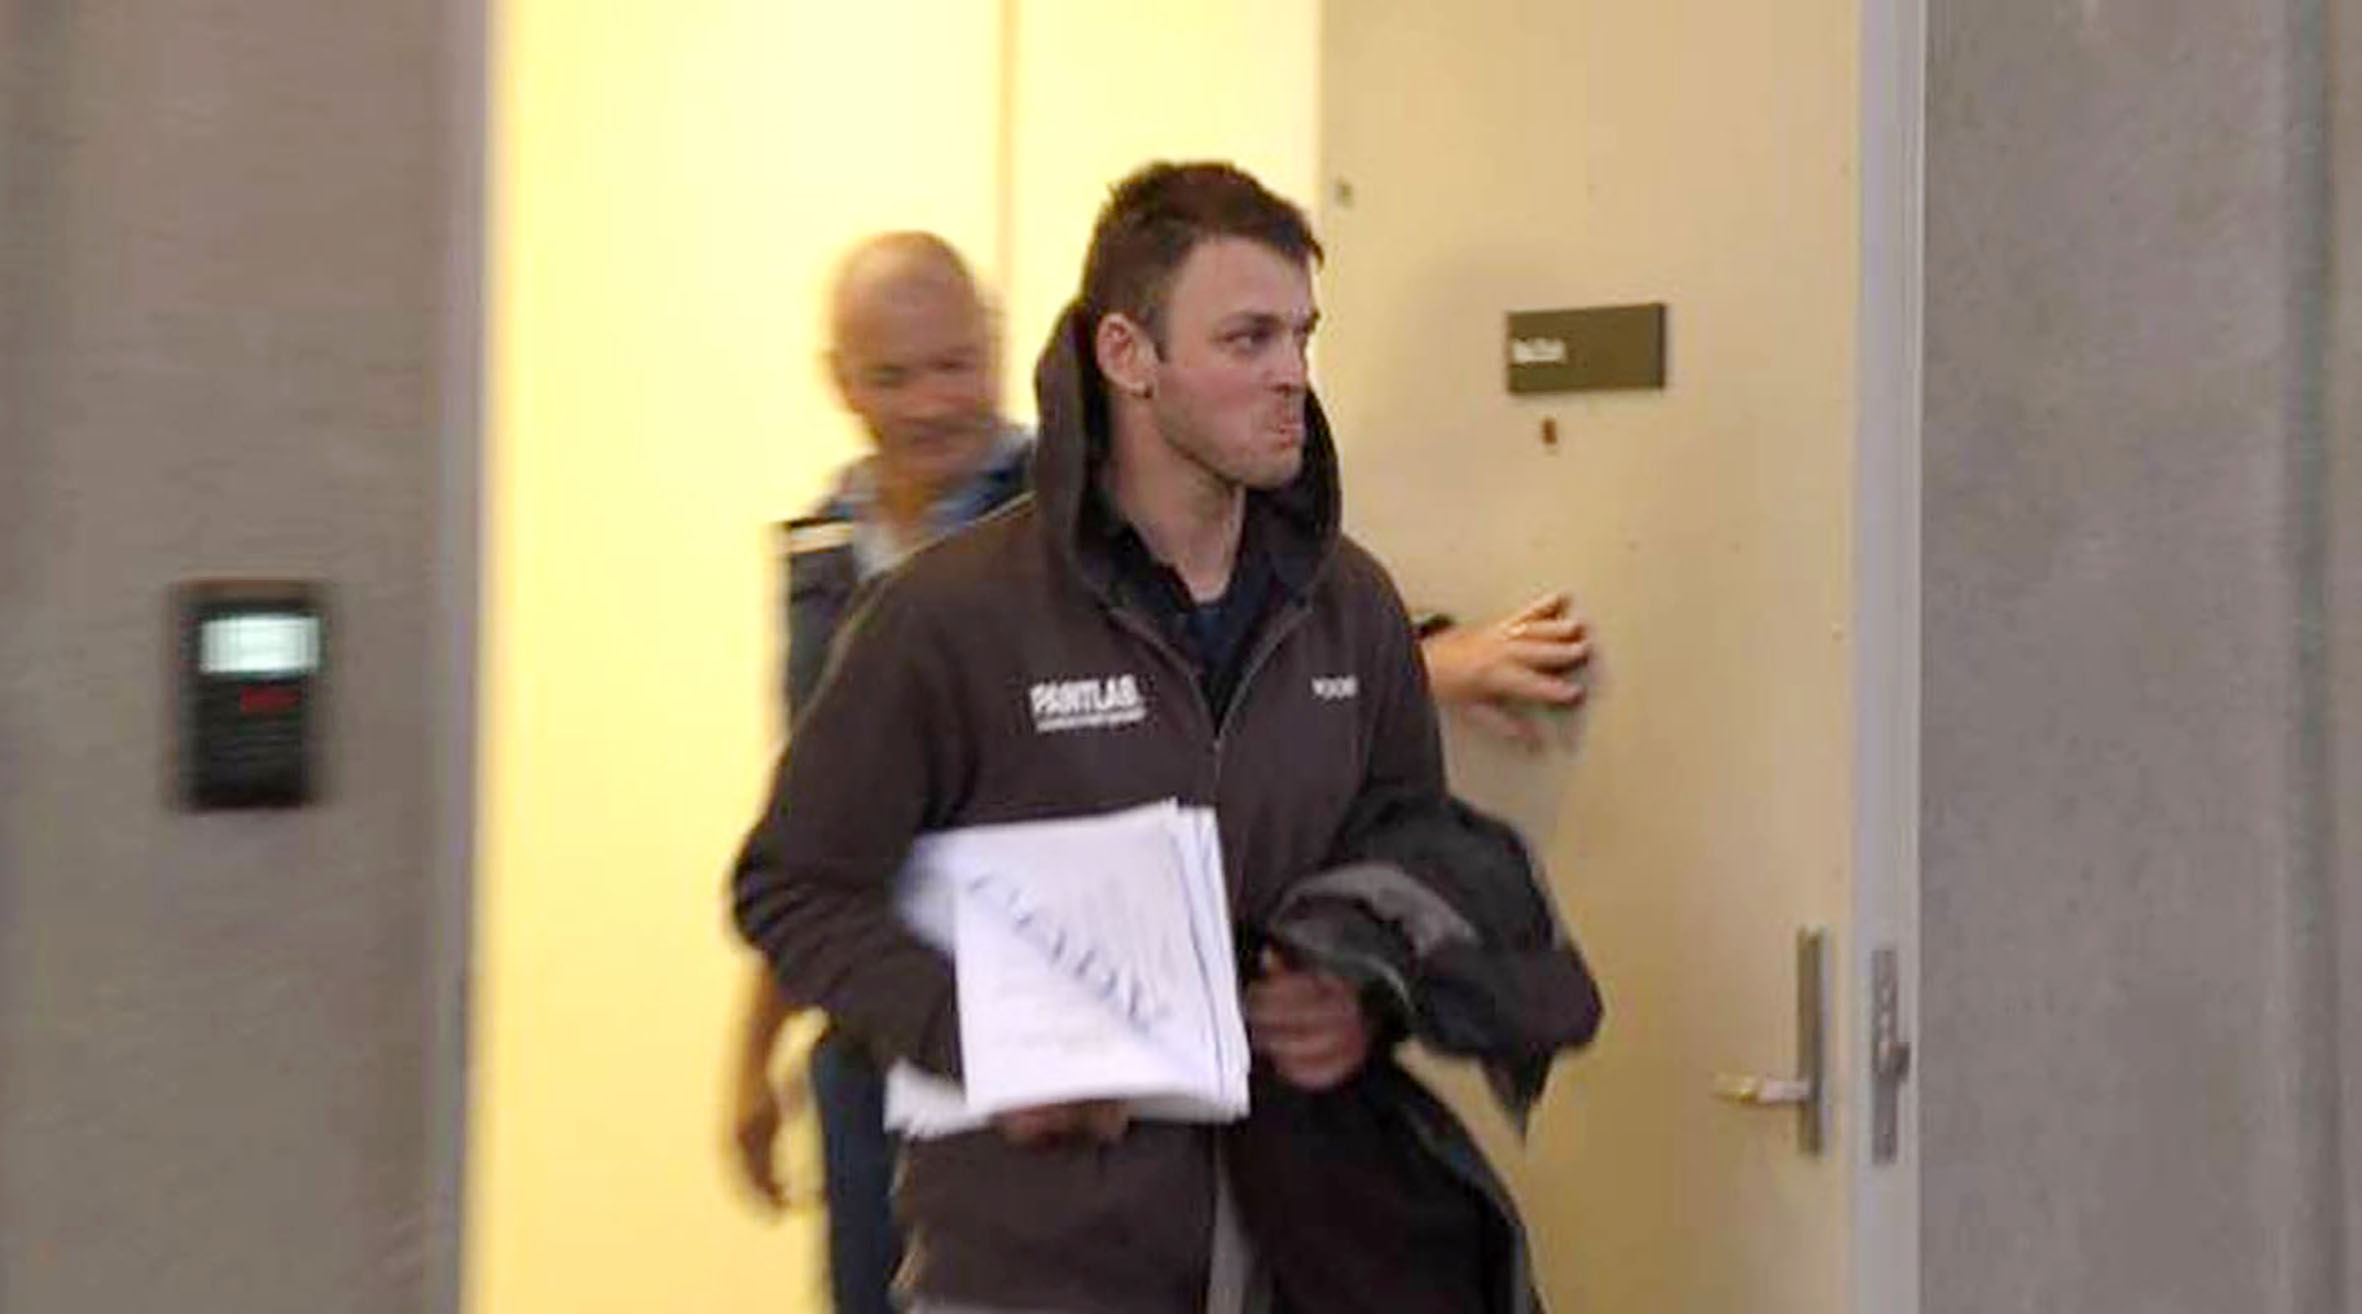 Matt Anderson was found guilty of assault after a judge-alone trial. Photo: NZH